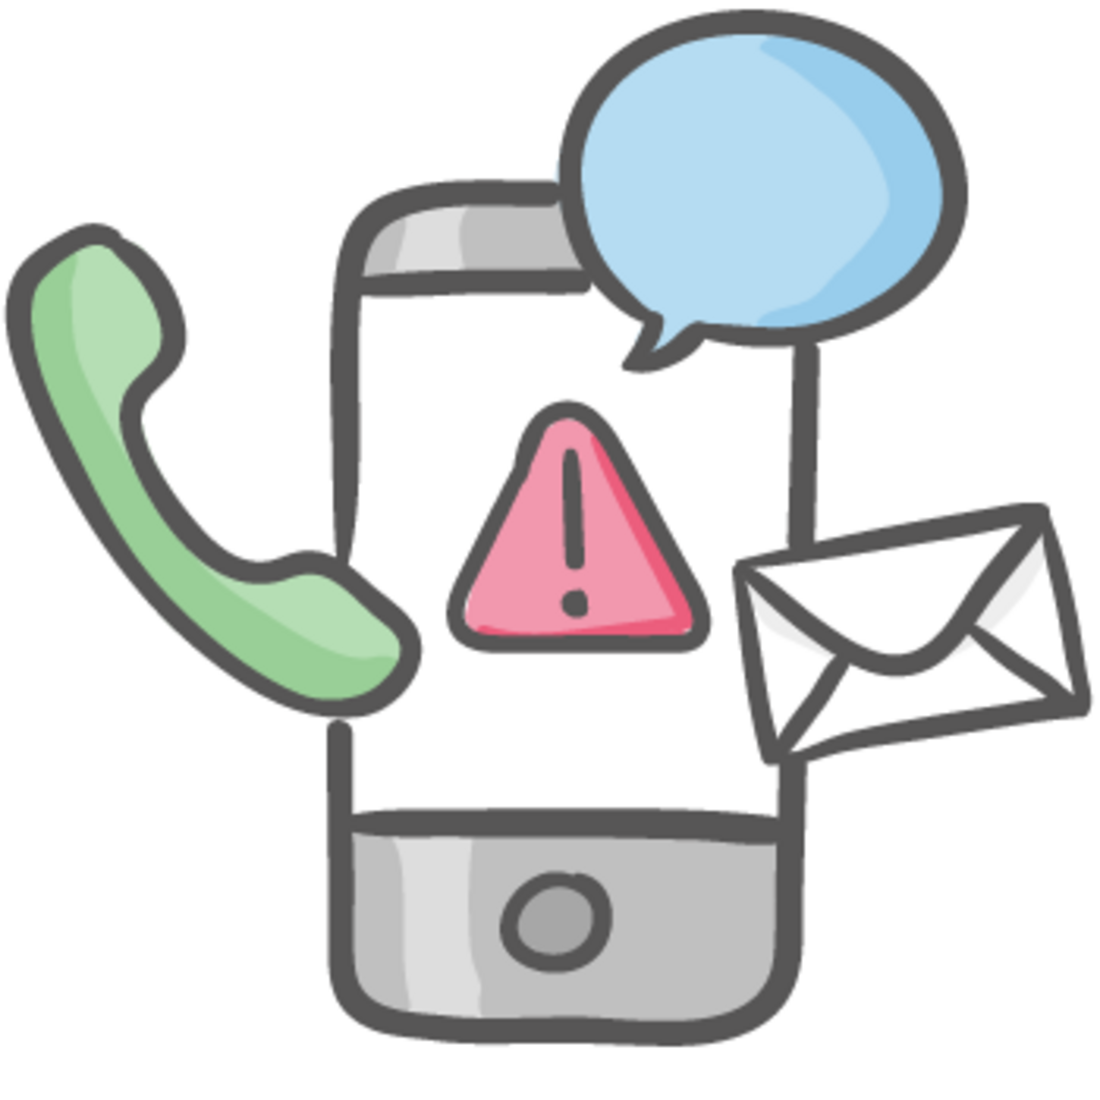 Notifications Remote Access